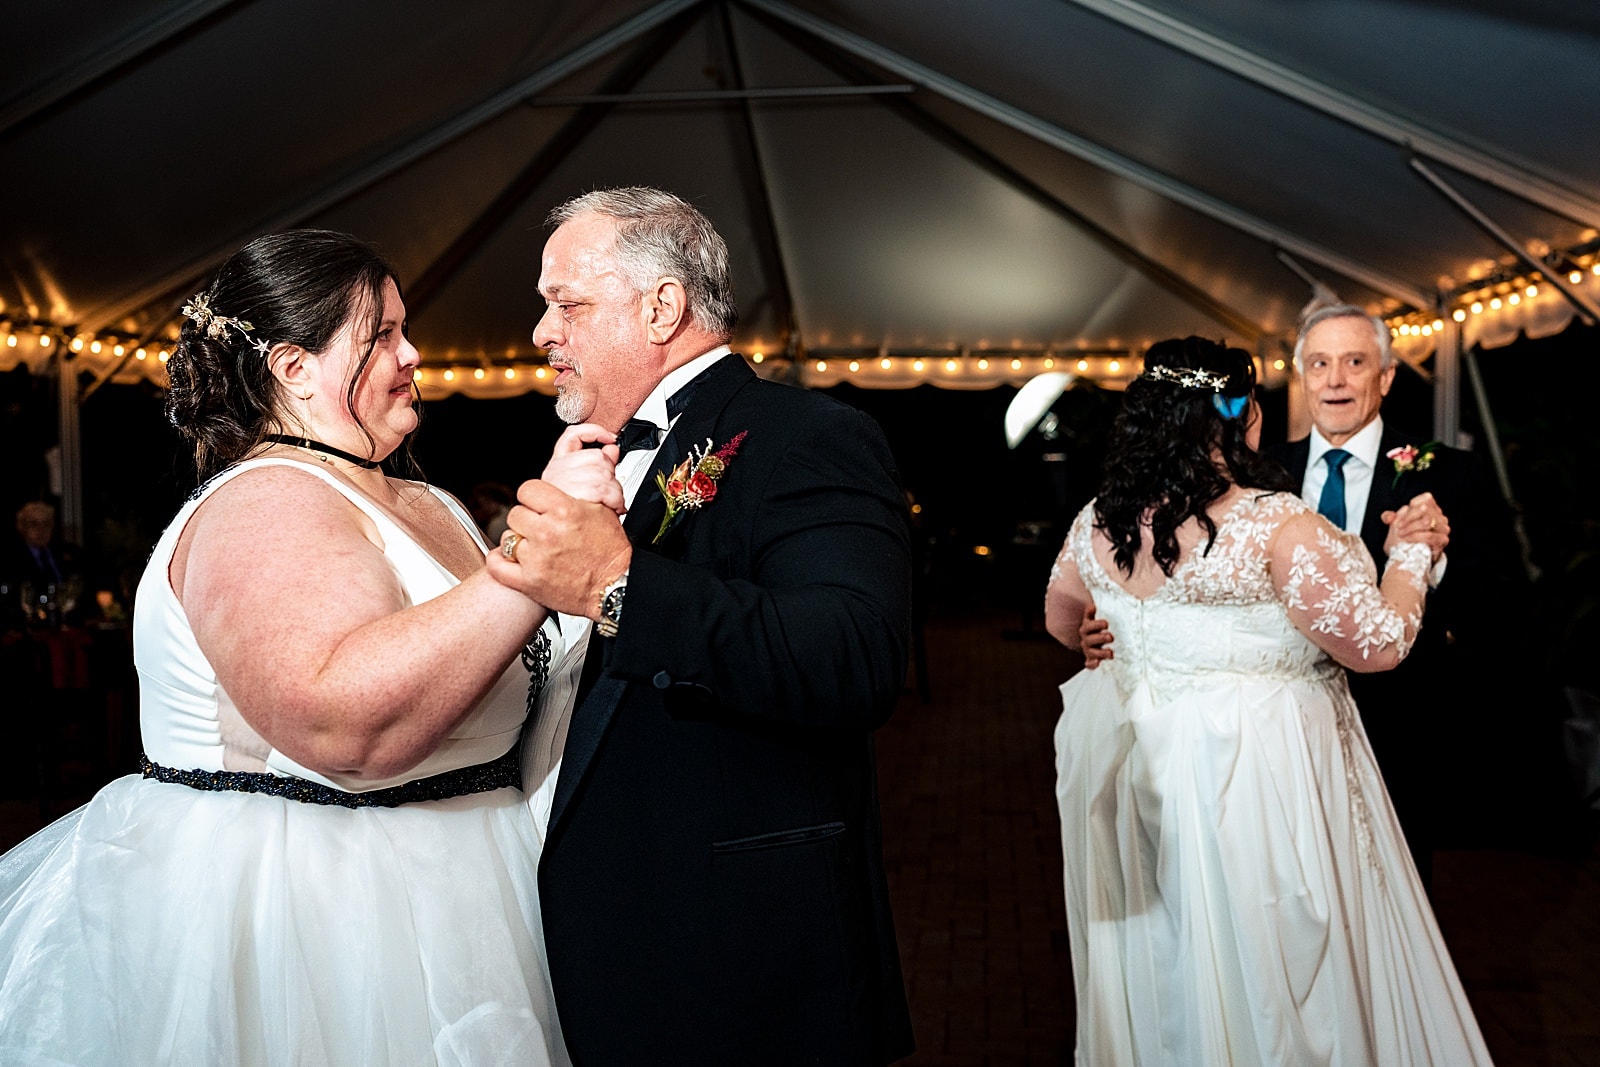 this wedding had two brides, and so there were two fathers of the bride which means double the tears from me!